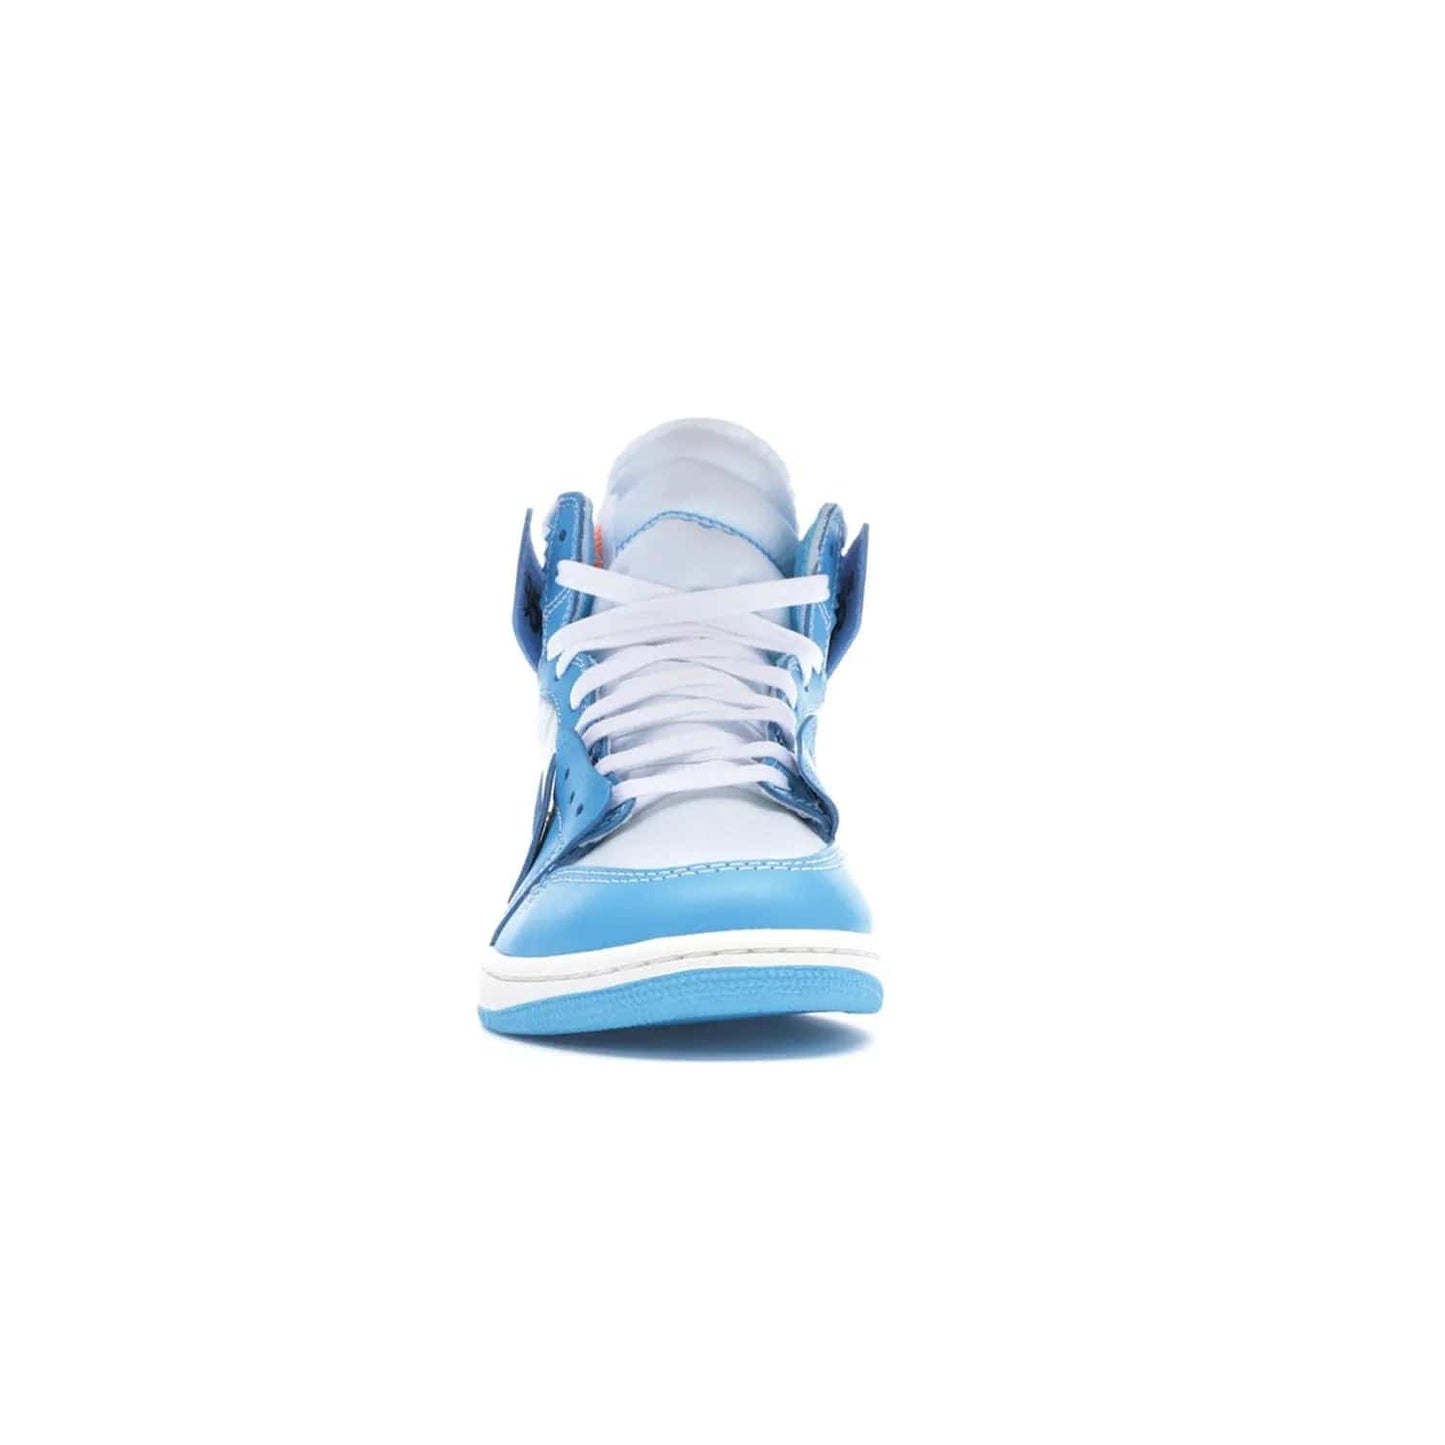 Jordan 1 Retro High Off-White University Blue - Image 10 - Only at www.BallersClubKickz.com - Classic Jordan 1 Retro High "Off-White UNC" sneakers meld style and comfort. Boasting deconstructed white and blue leather, Off-White detailing, and a white, dark powder blue and cone colorway, these sneakers are perfect for dressing up or down. Get the iconic Off-White Jordan 1's and upgrade your look.